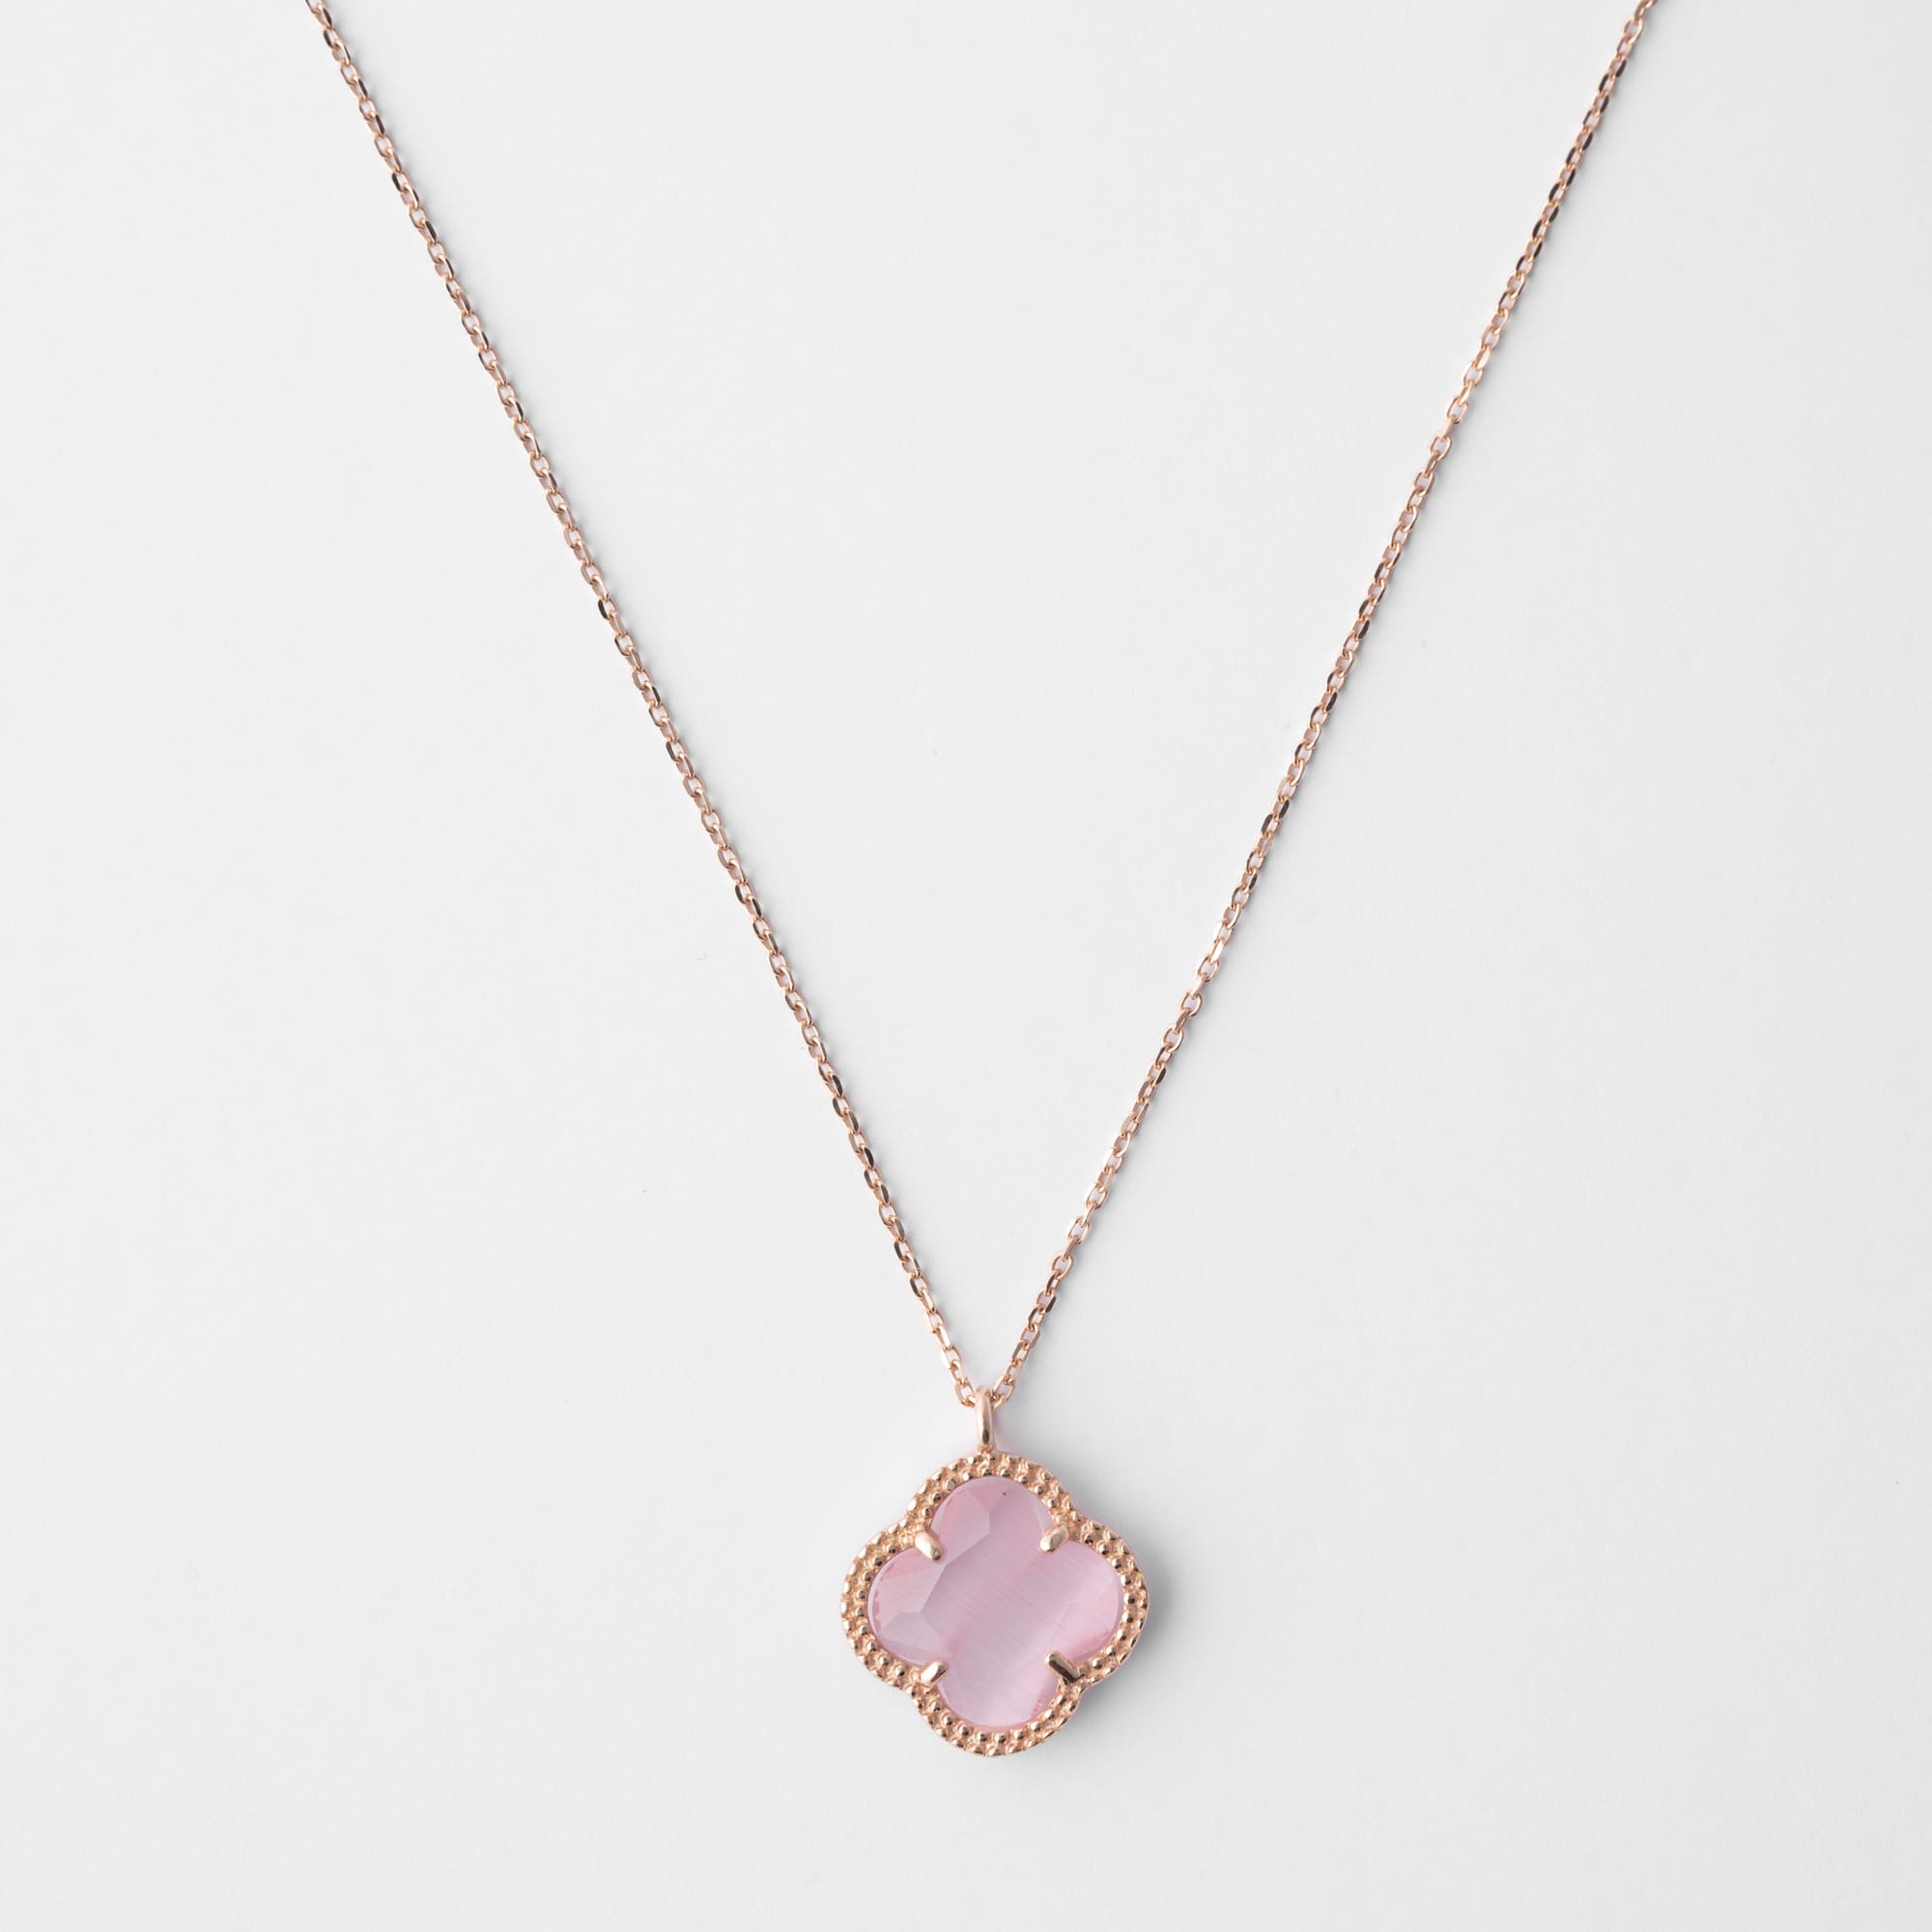 CLOVER Silver Necklace with Pink Quartz